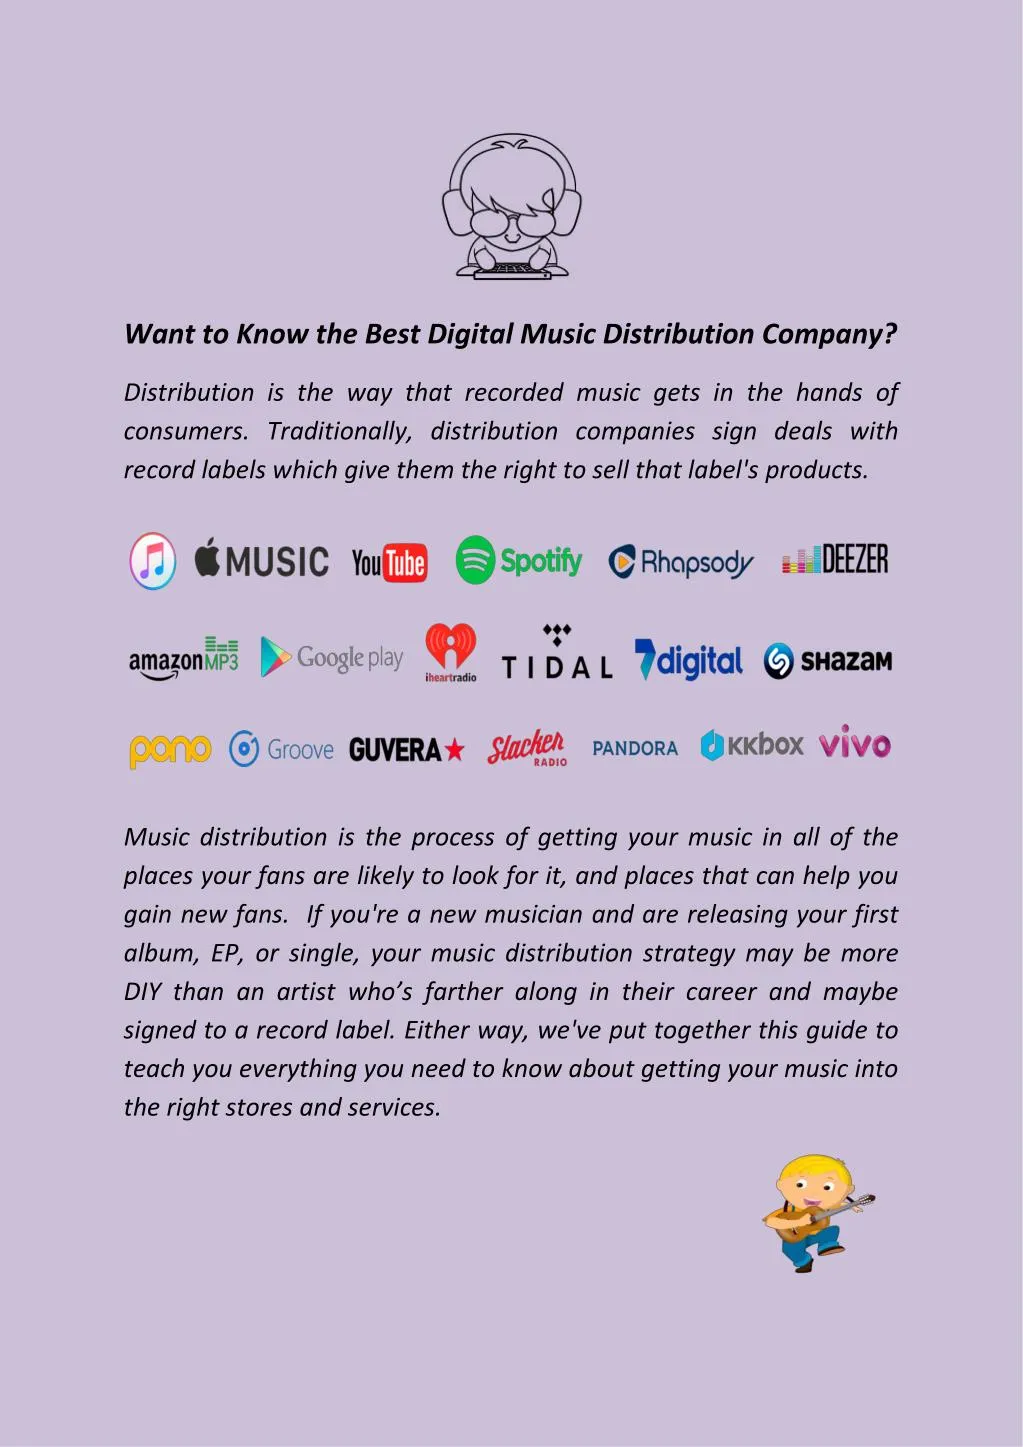 want to know the best digital music distribution